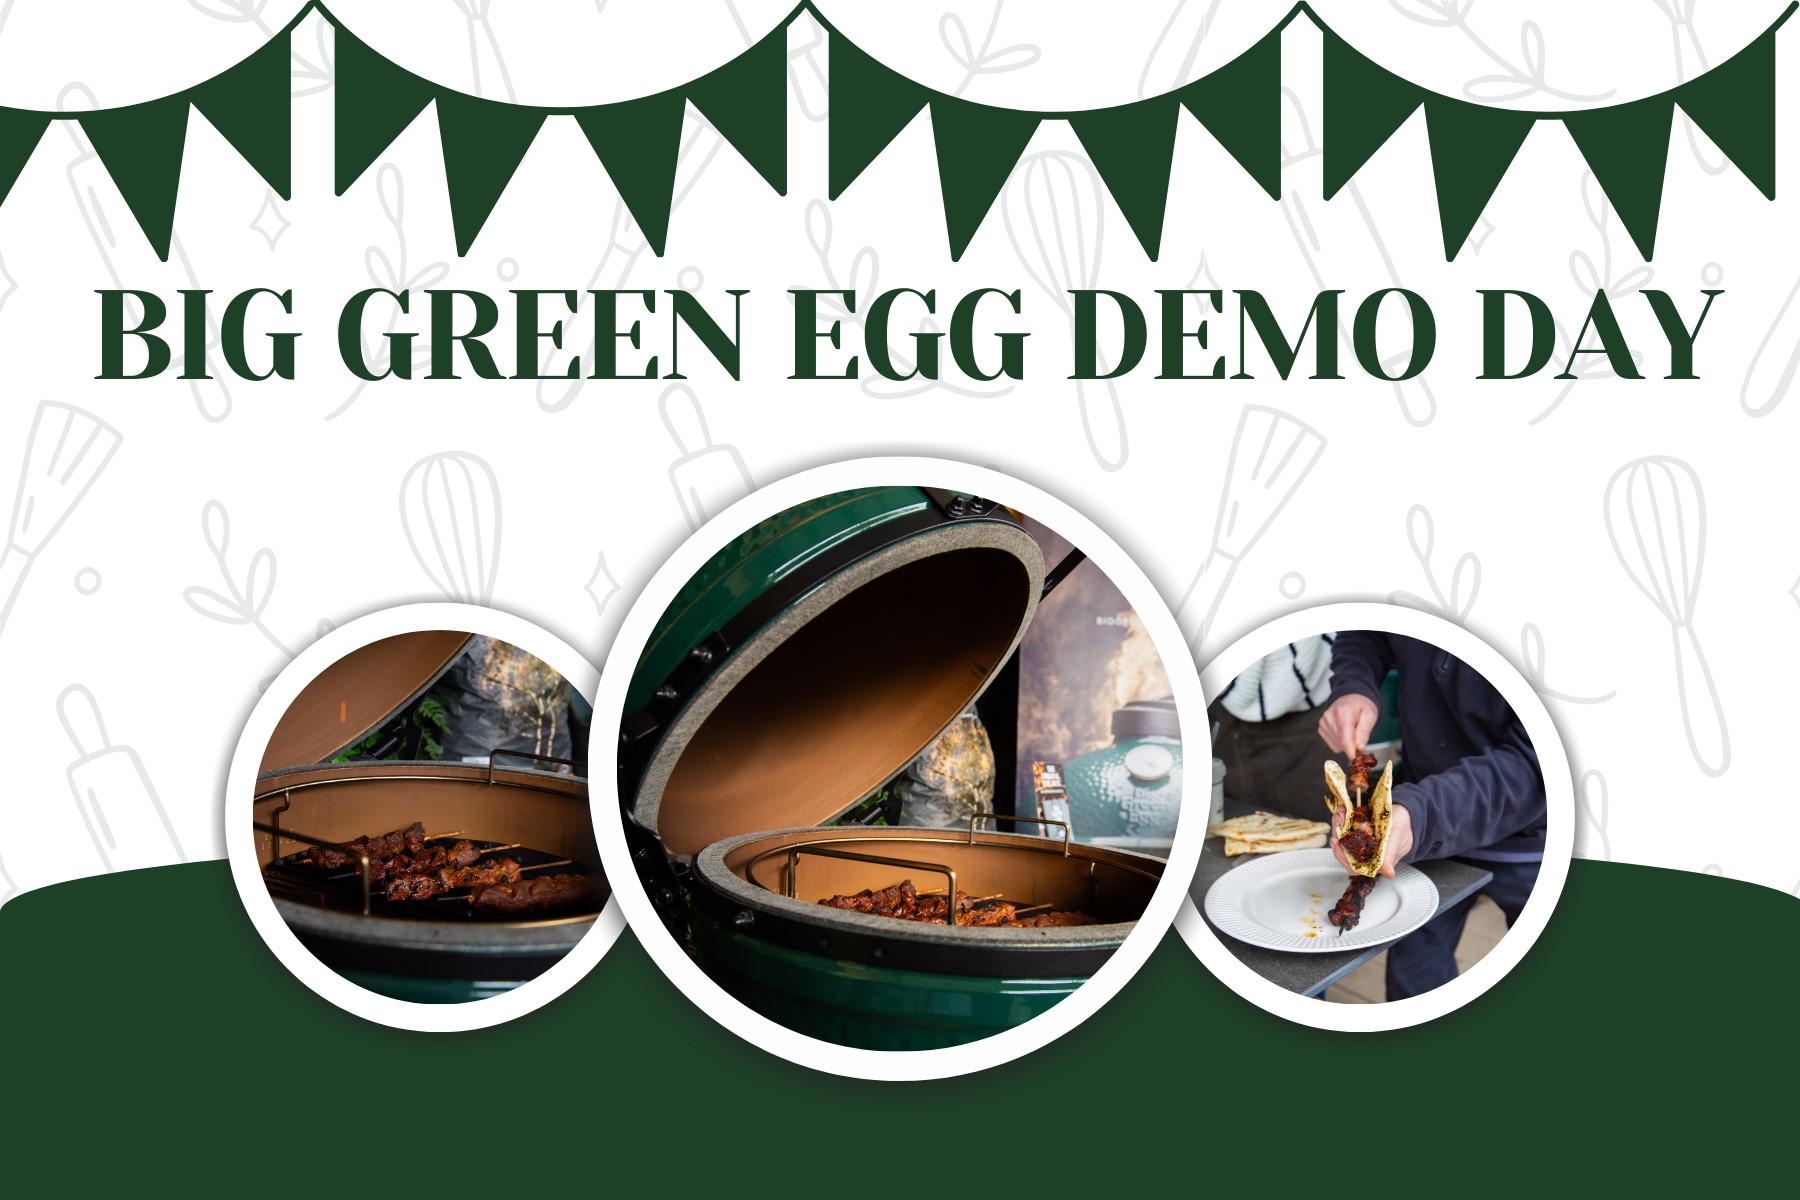 Read all about our Big Green Egg Demo Day here!